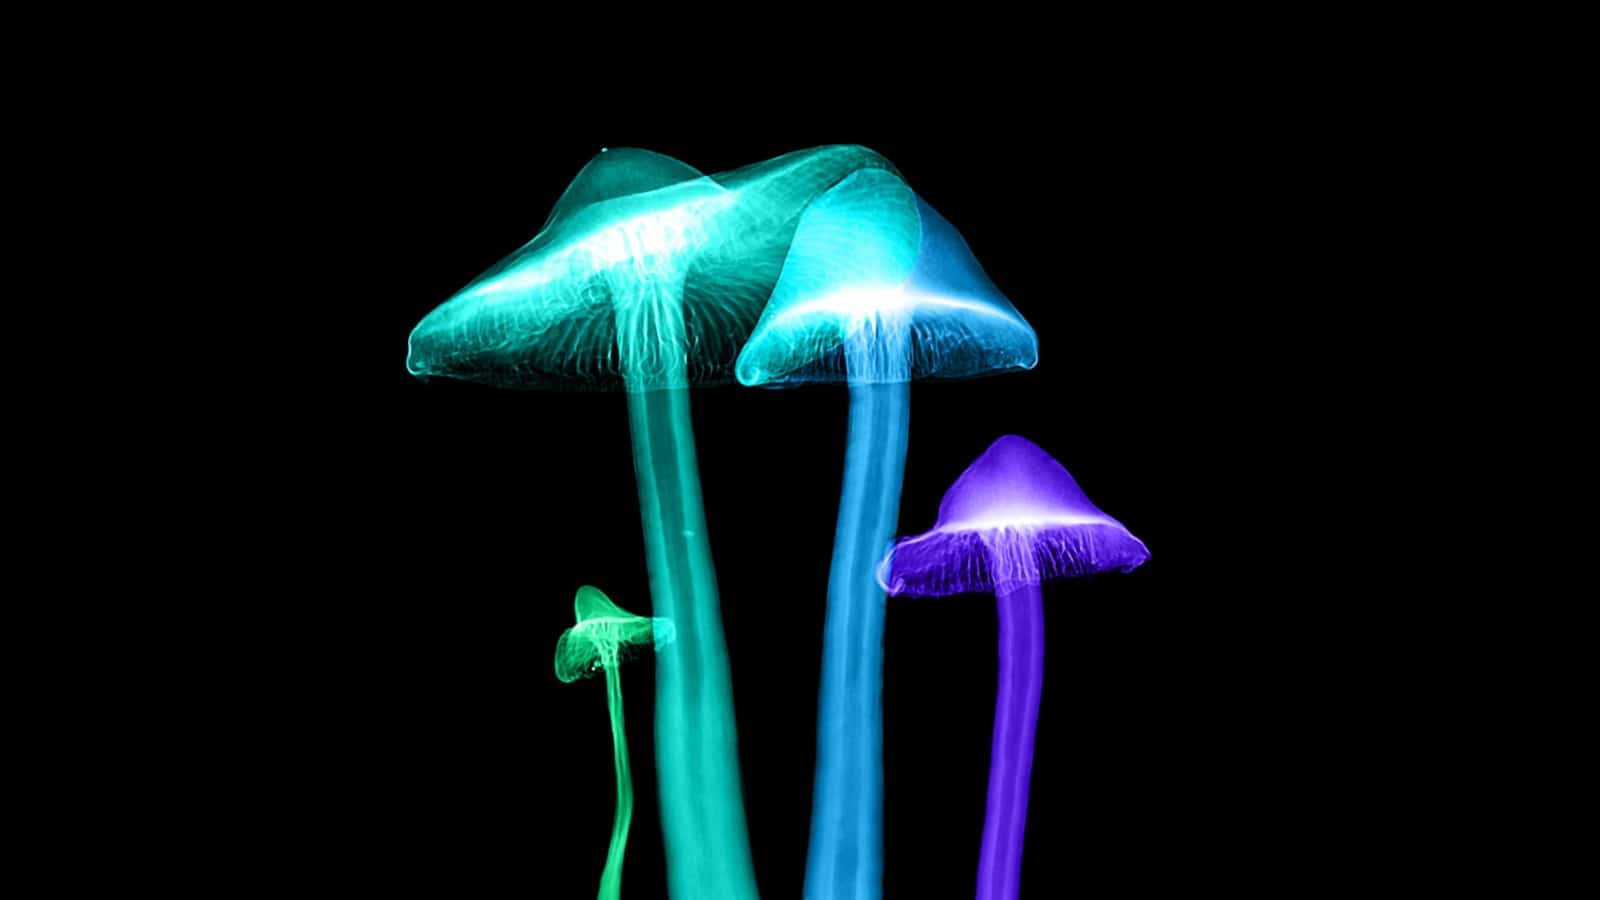 glowing mushrooms - illustration for fantasy story wild mushrooms and other dangers